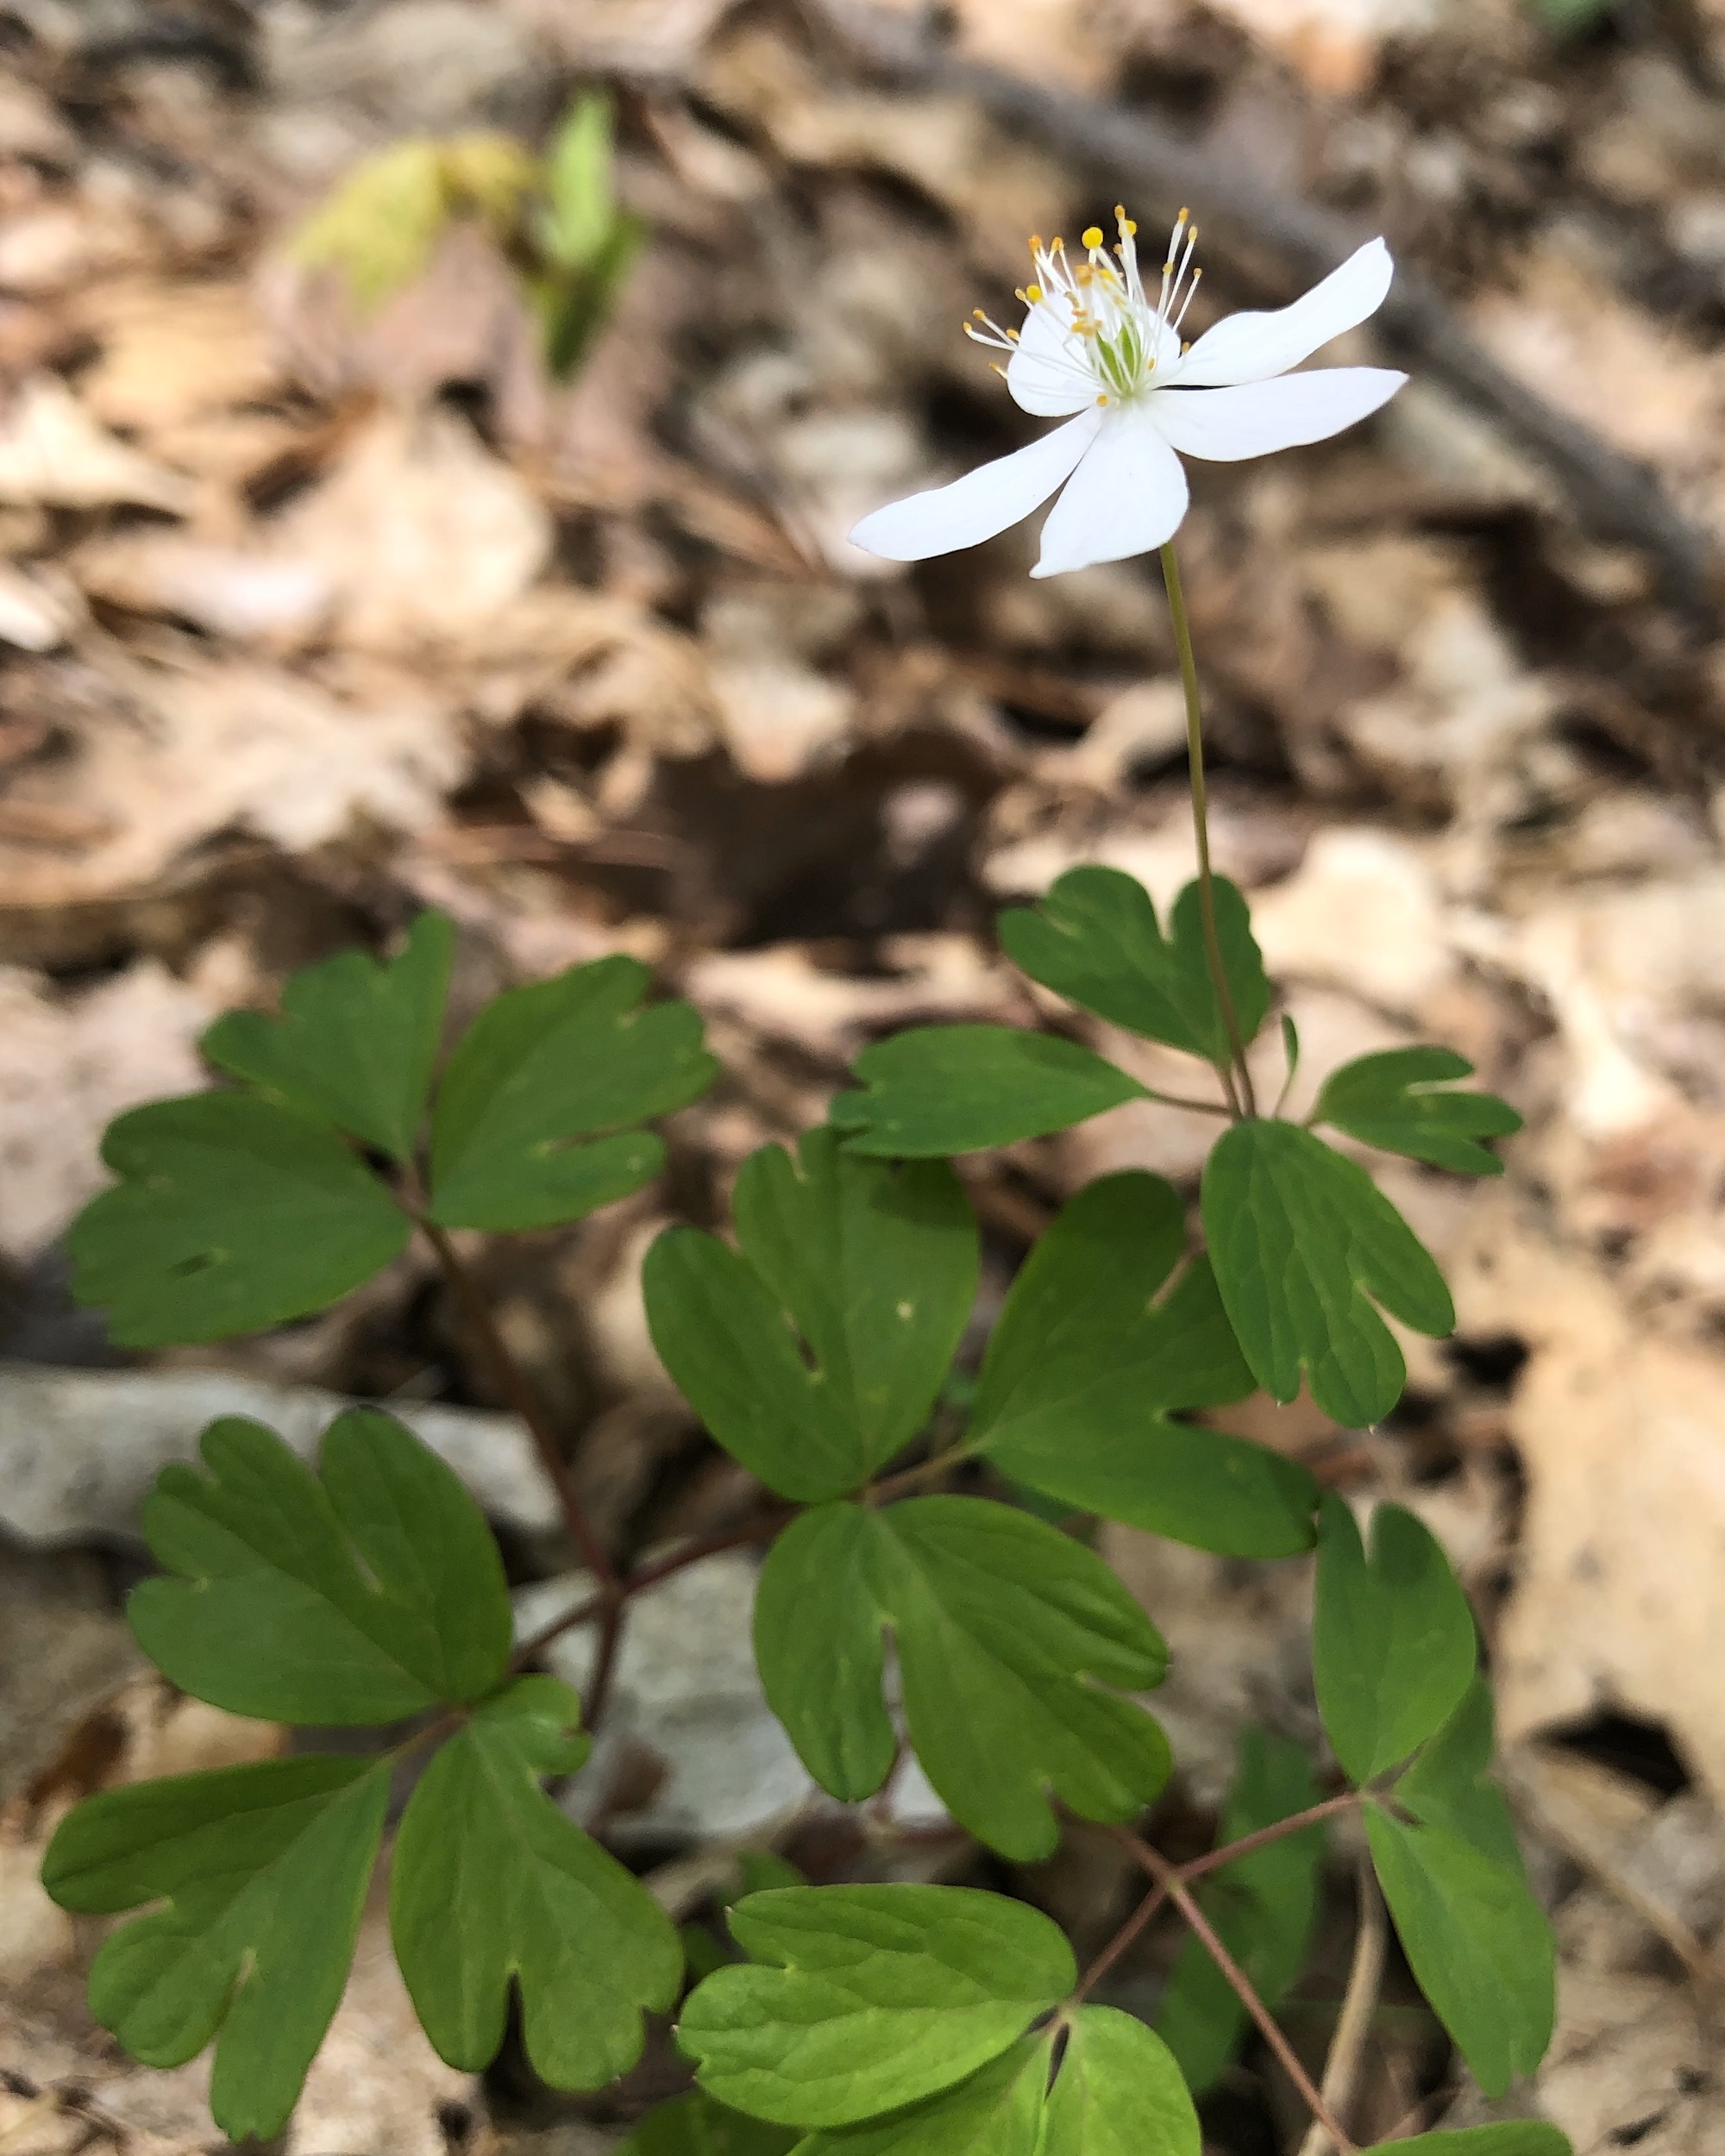 False Rue Anemone in the Maple-Basswood Forest of the University of Wisconsin Arboretum in Madison, Wisconsin on May 6, 2020.